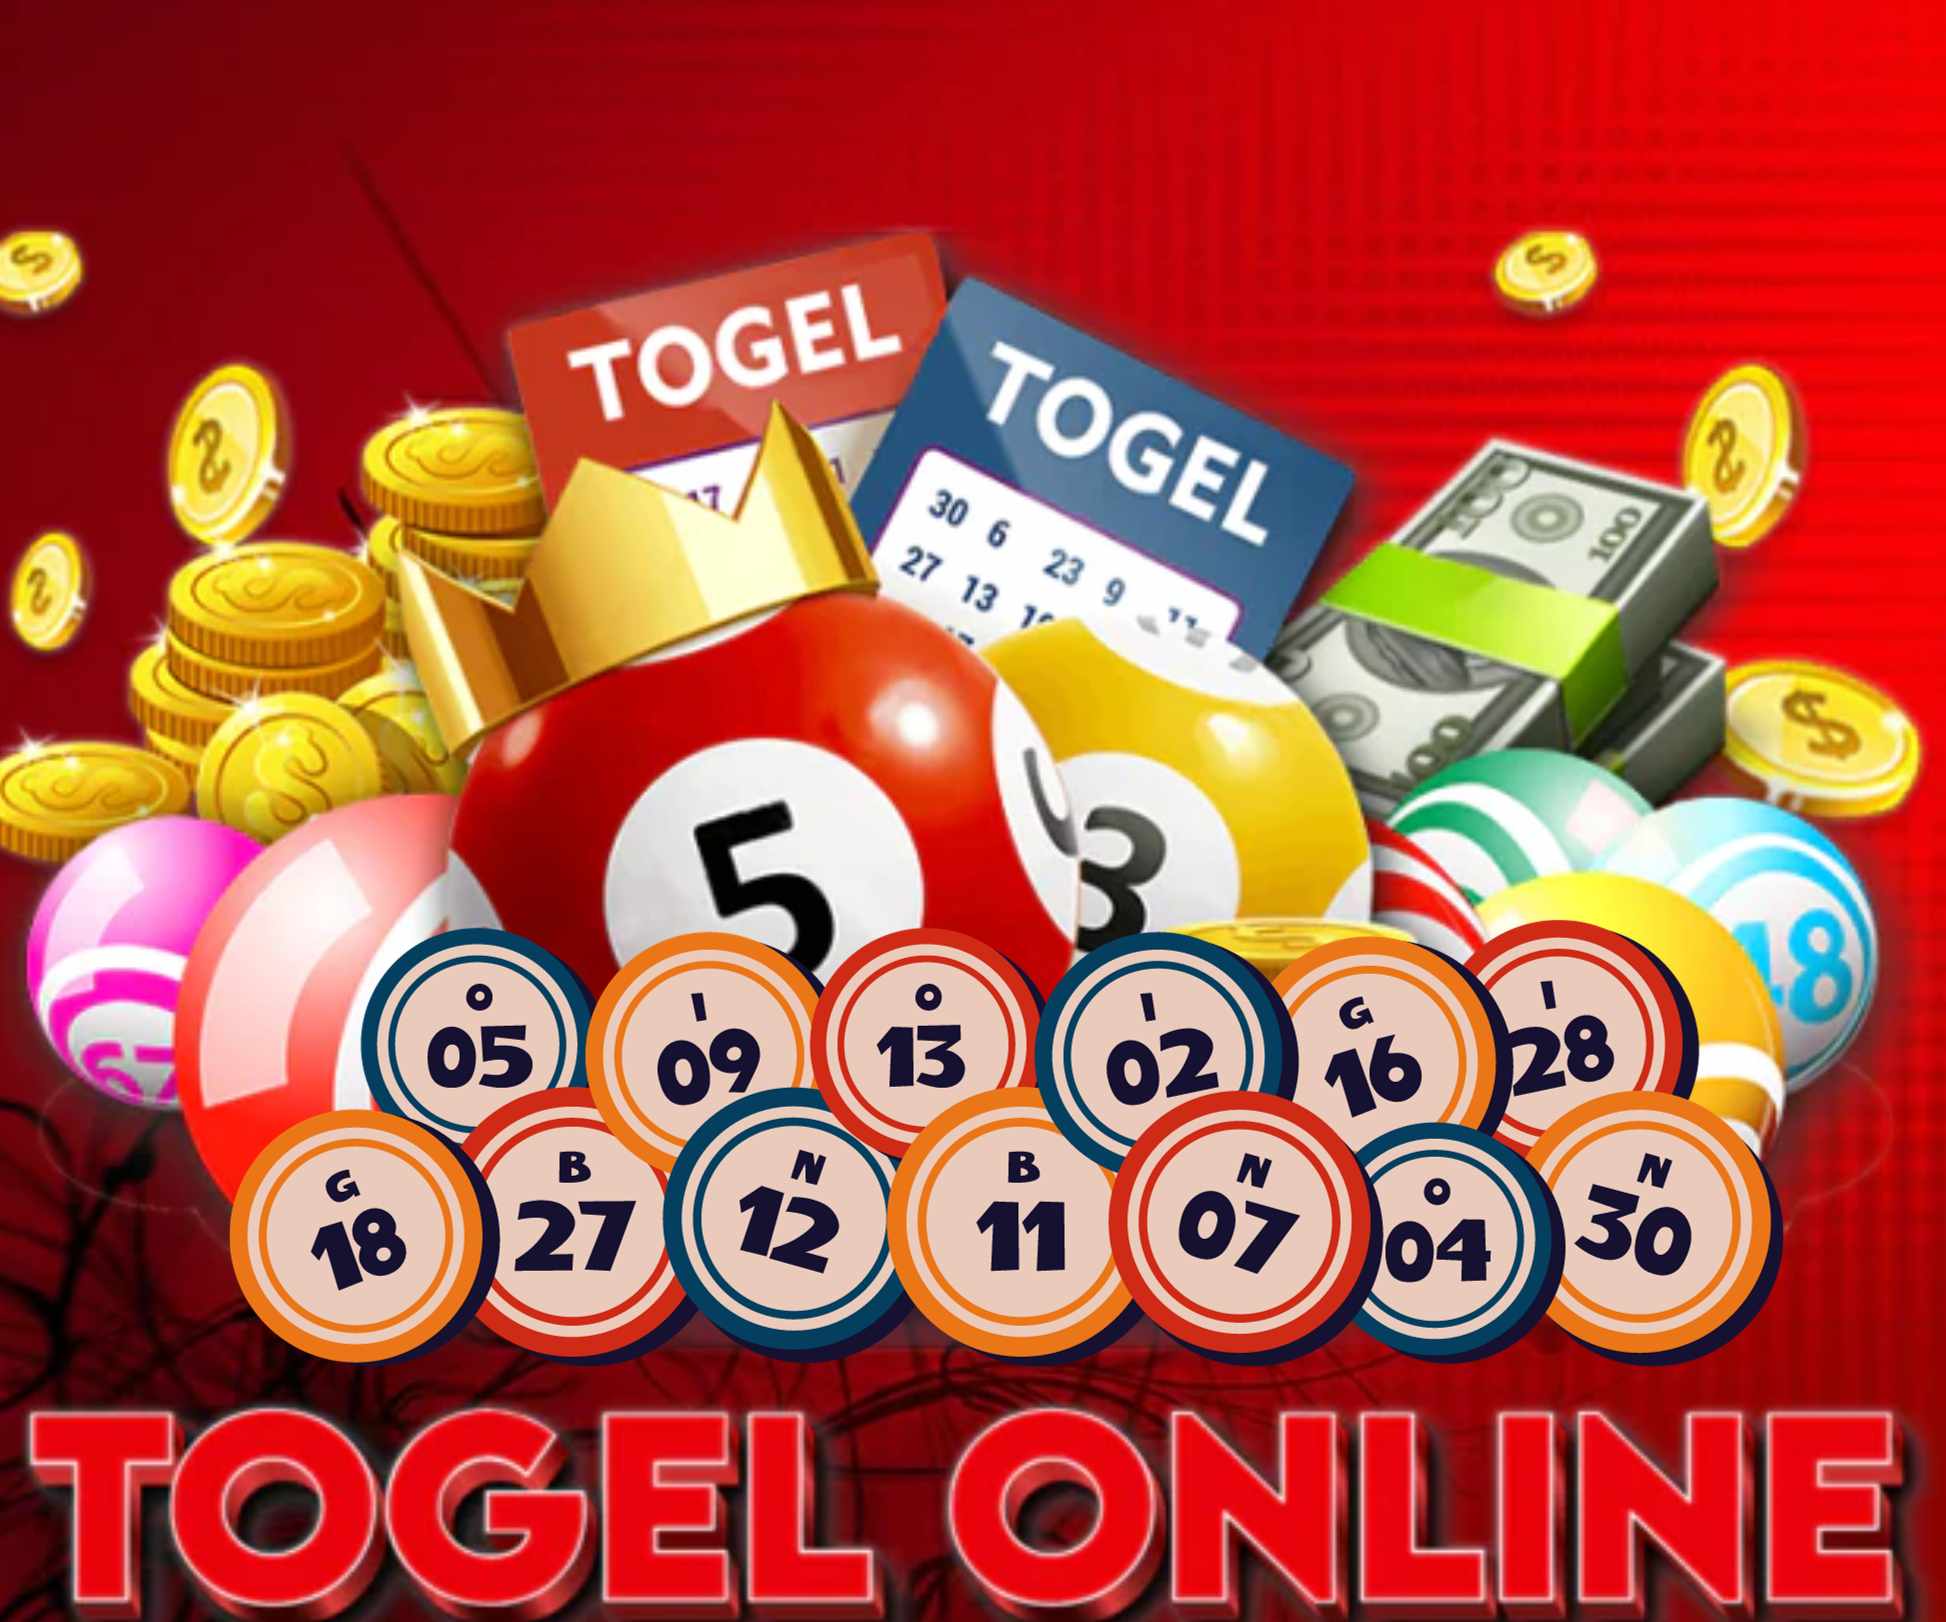 What is a no togel and why is togel so popular?